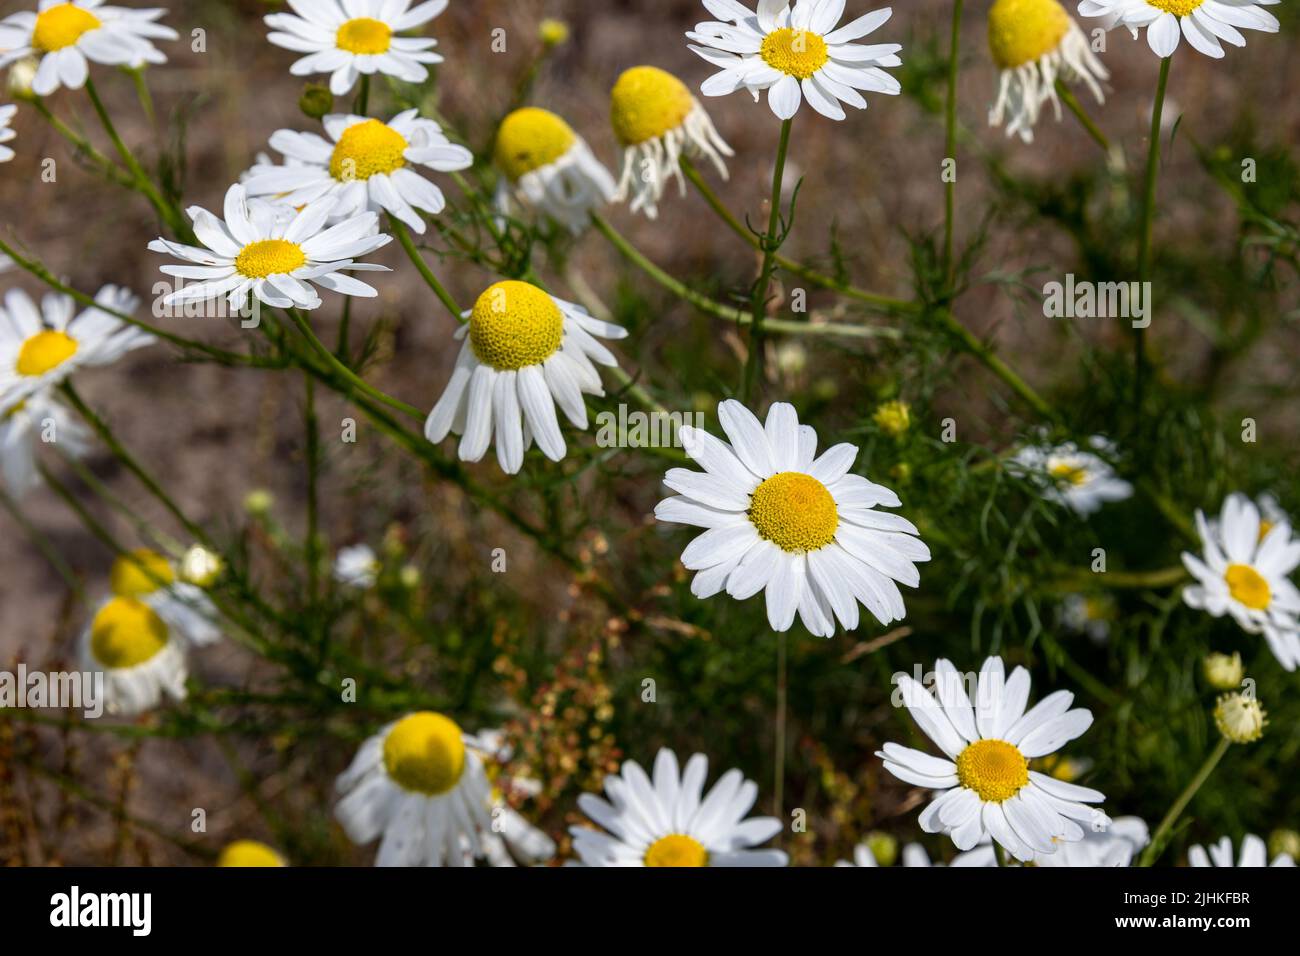 Wild flowering daisies, with bright white petals and bright yellow pistils. Growing on poor nutrient-poor sandy soil Stock Photo